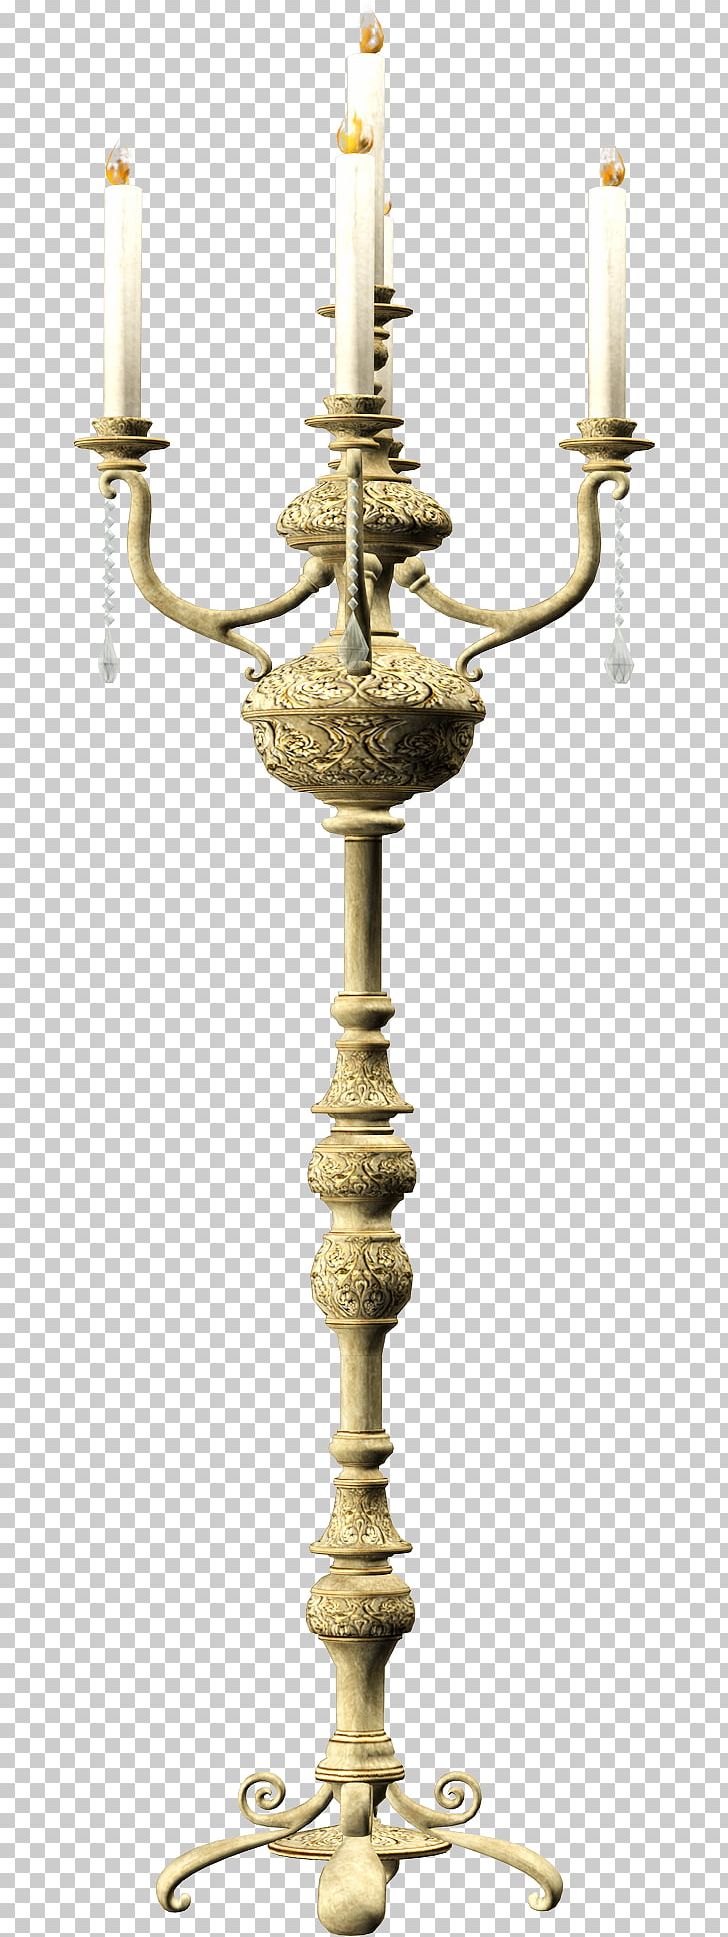 Candlestick PNG, Clipart, Brass, Candle, Candle Holder, Candles, Candlestick Free PNG Download